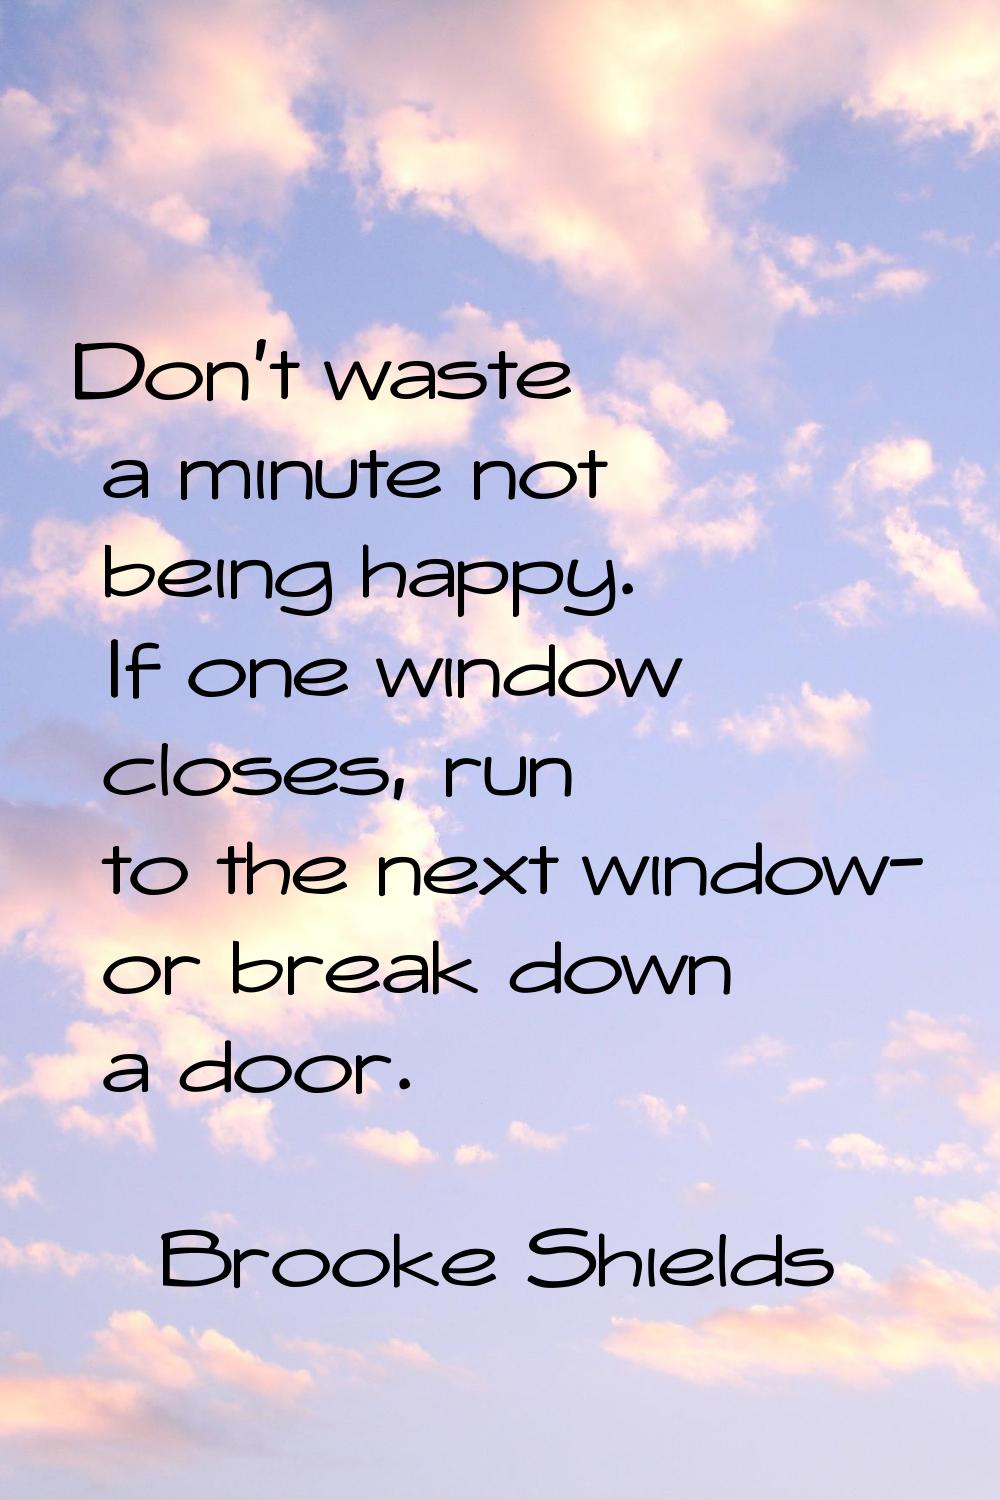 Don't waste a minute not being happy. If one window closes, run to the next window- or break down a